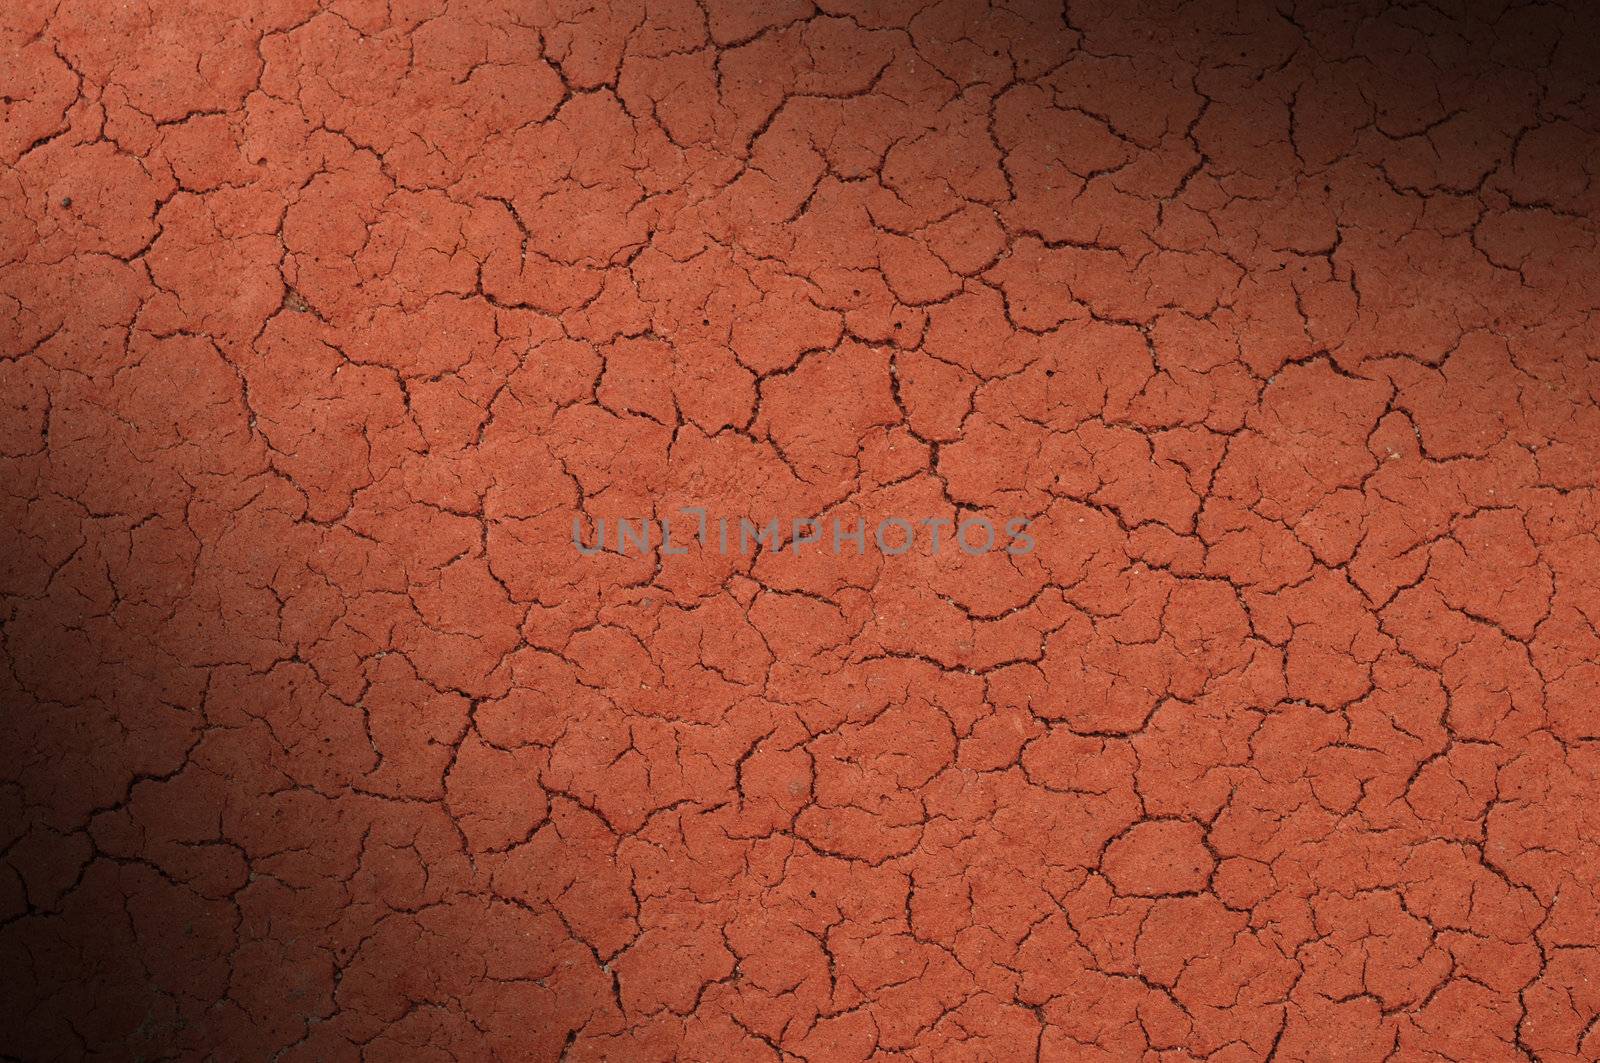 Cracked red textured surface background, dramatically lit diagonally